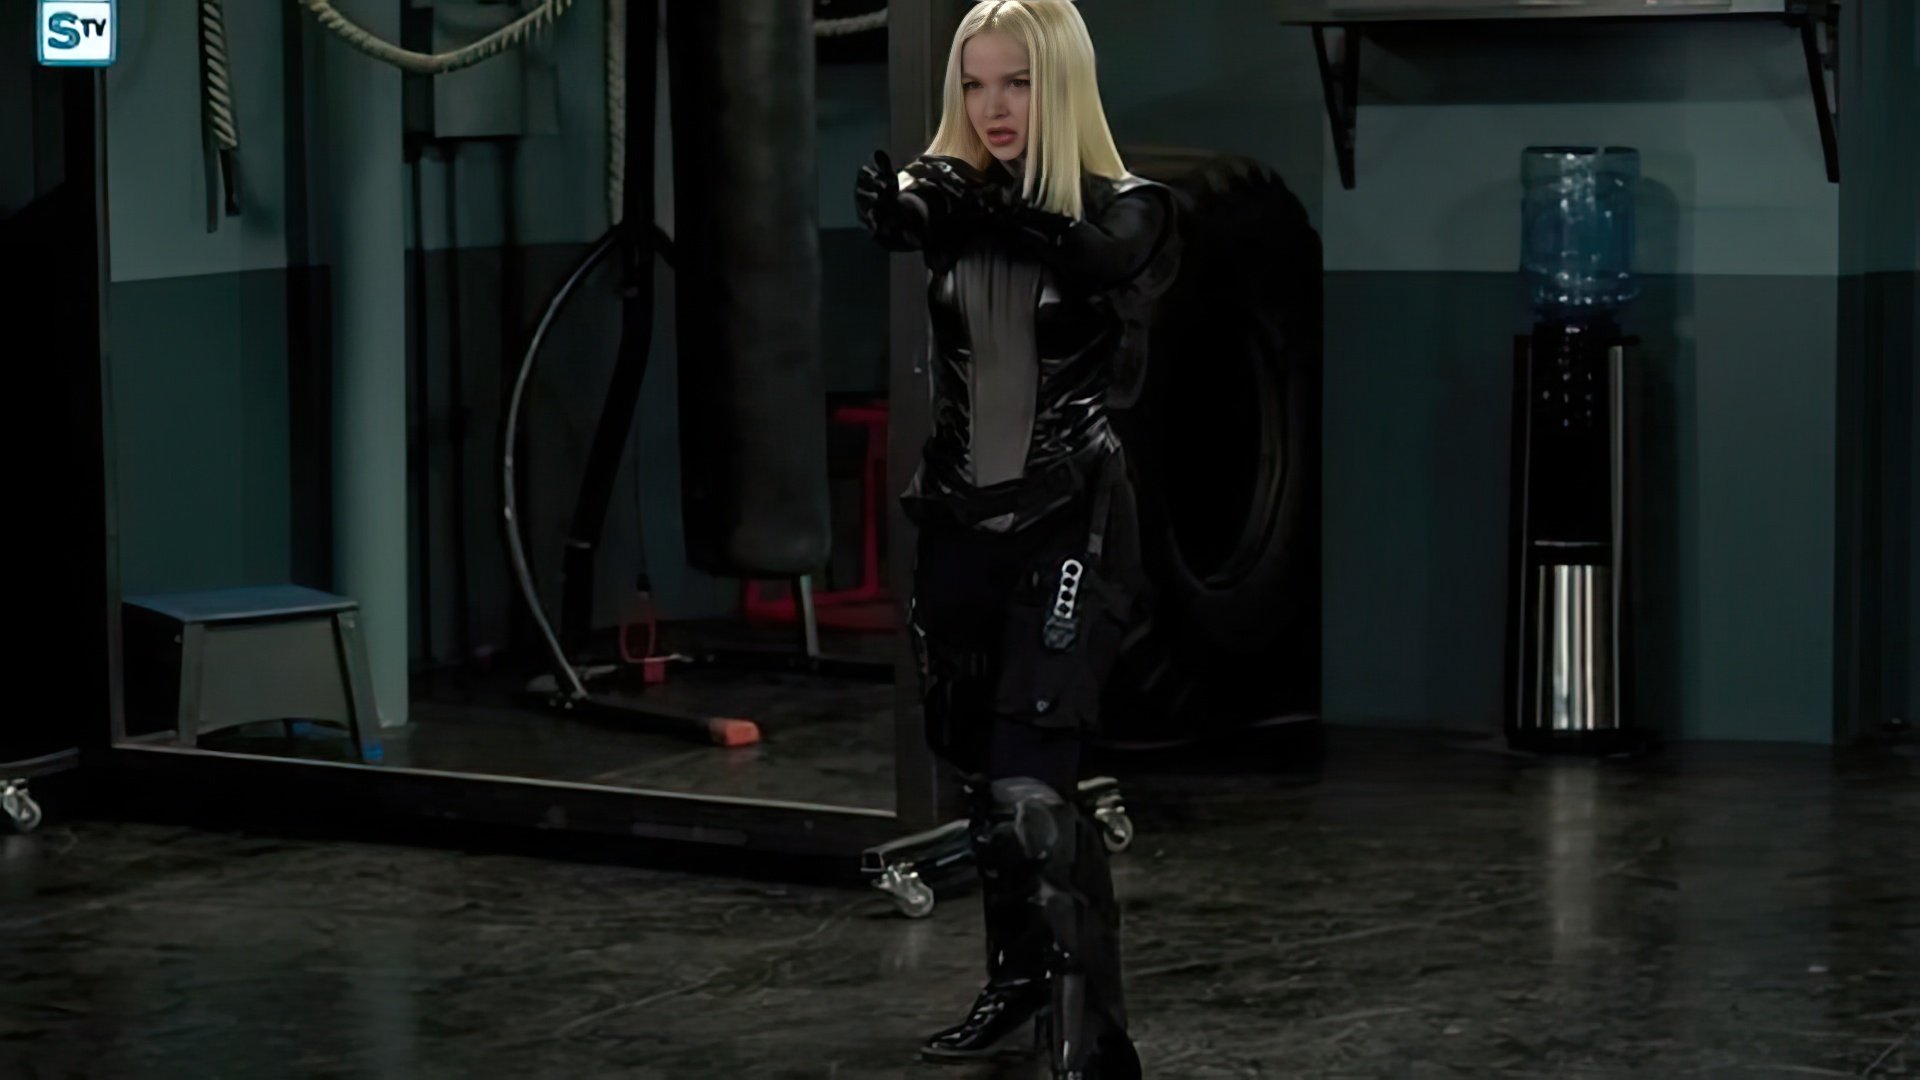 Dove Cameron in the Agents of S.H.I.E.L.D. series